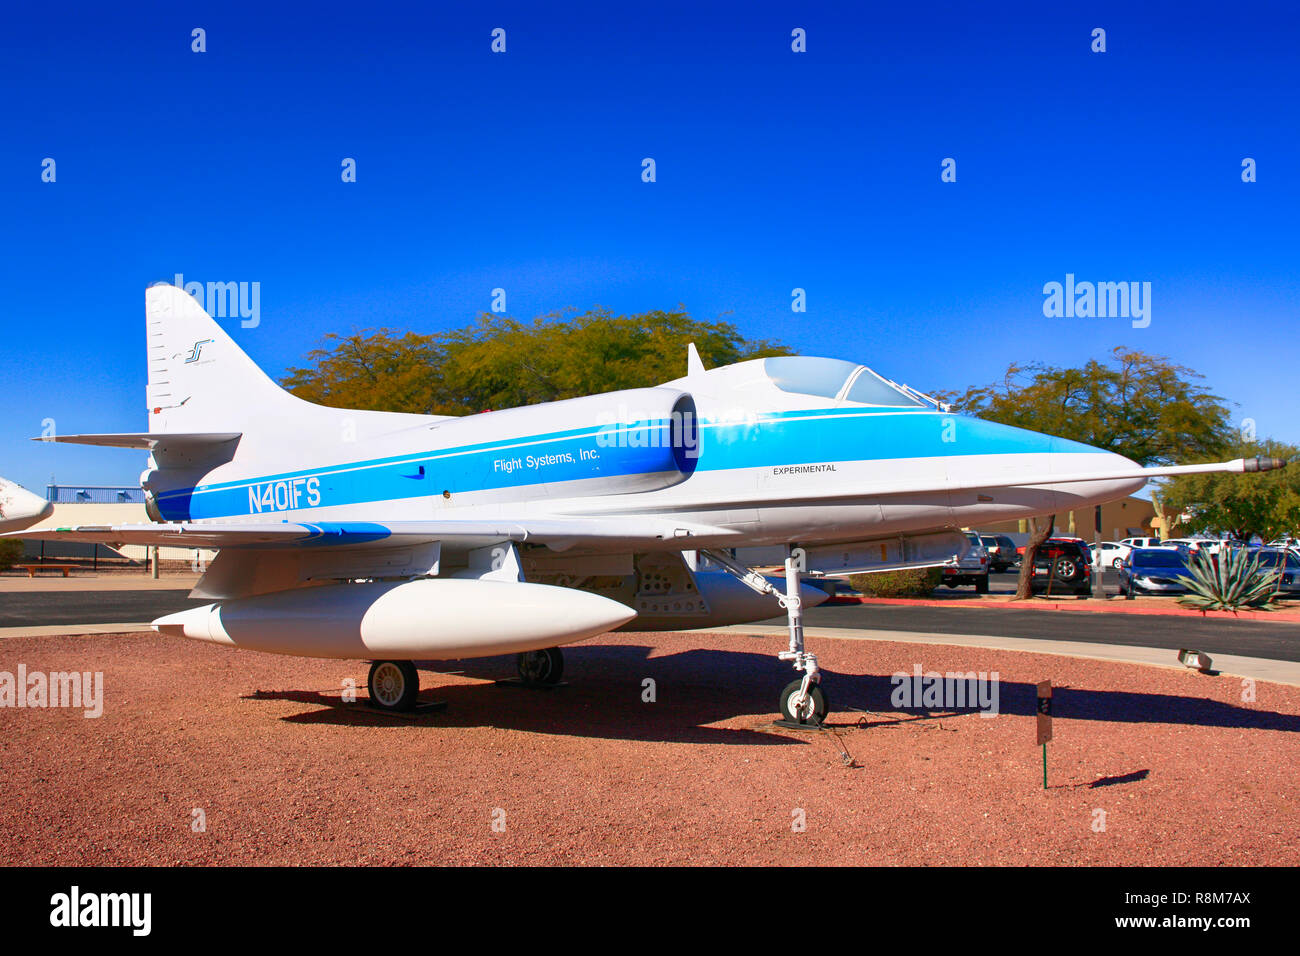 Douglas A4C Skyhawk fighter jet plane at the entrance to the Pima Air & Space Museum in Tucson, Arizona Stock Photo